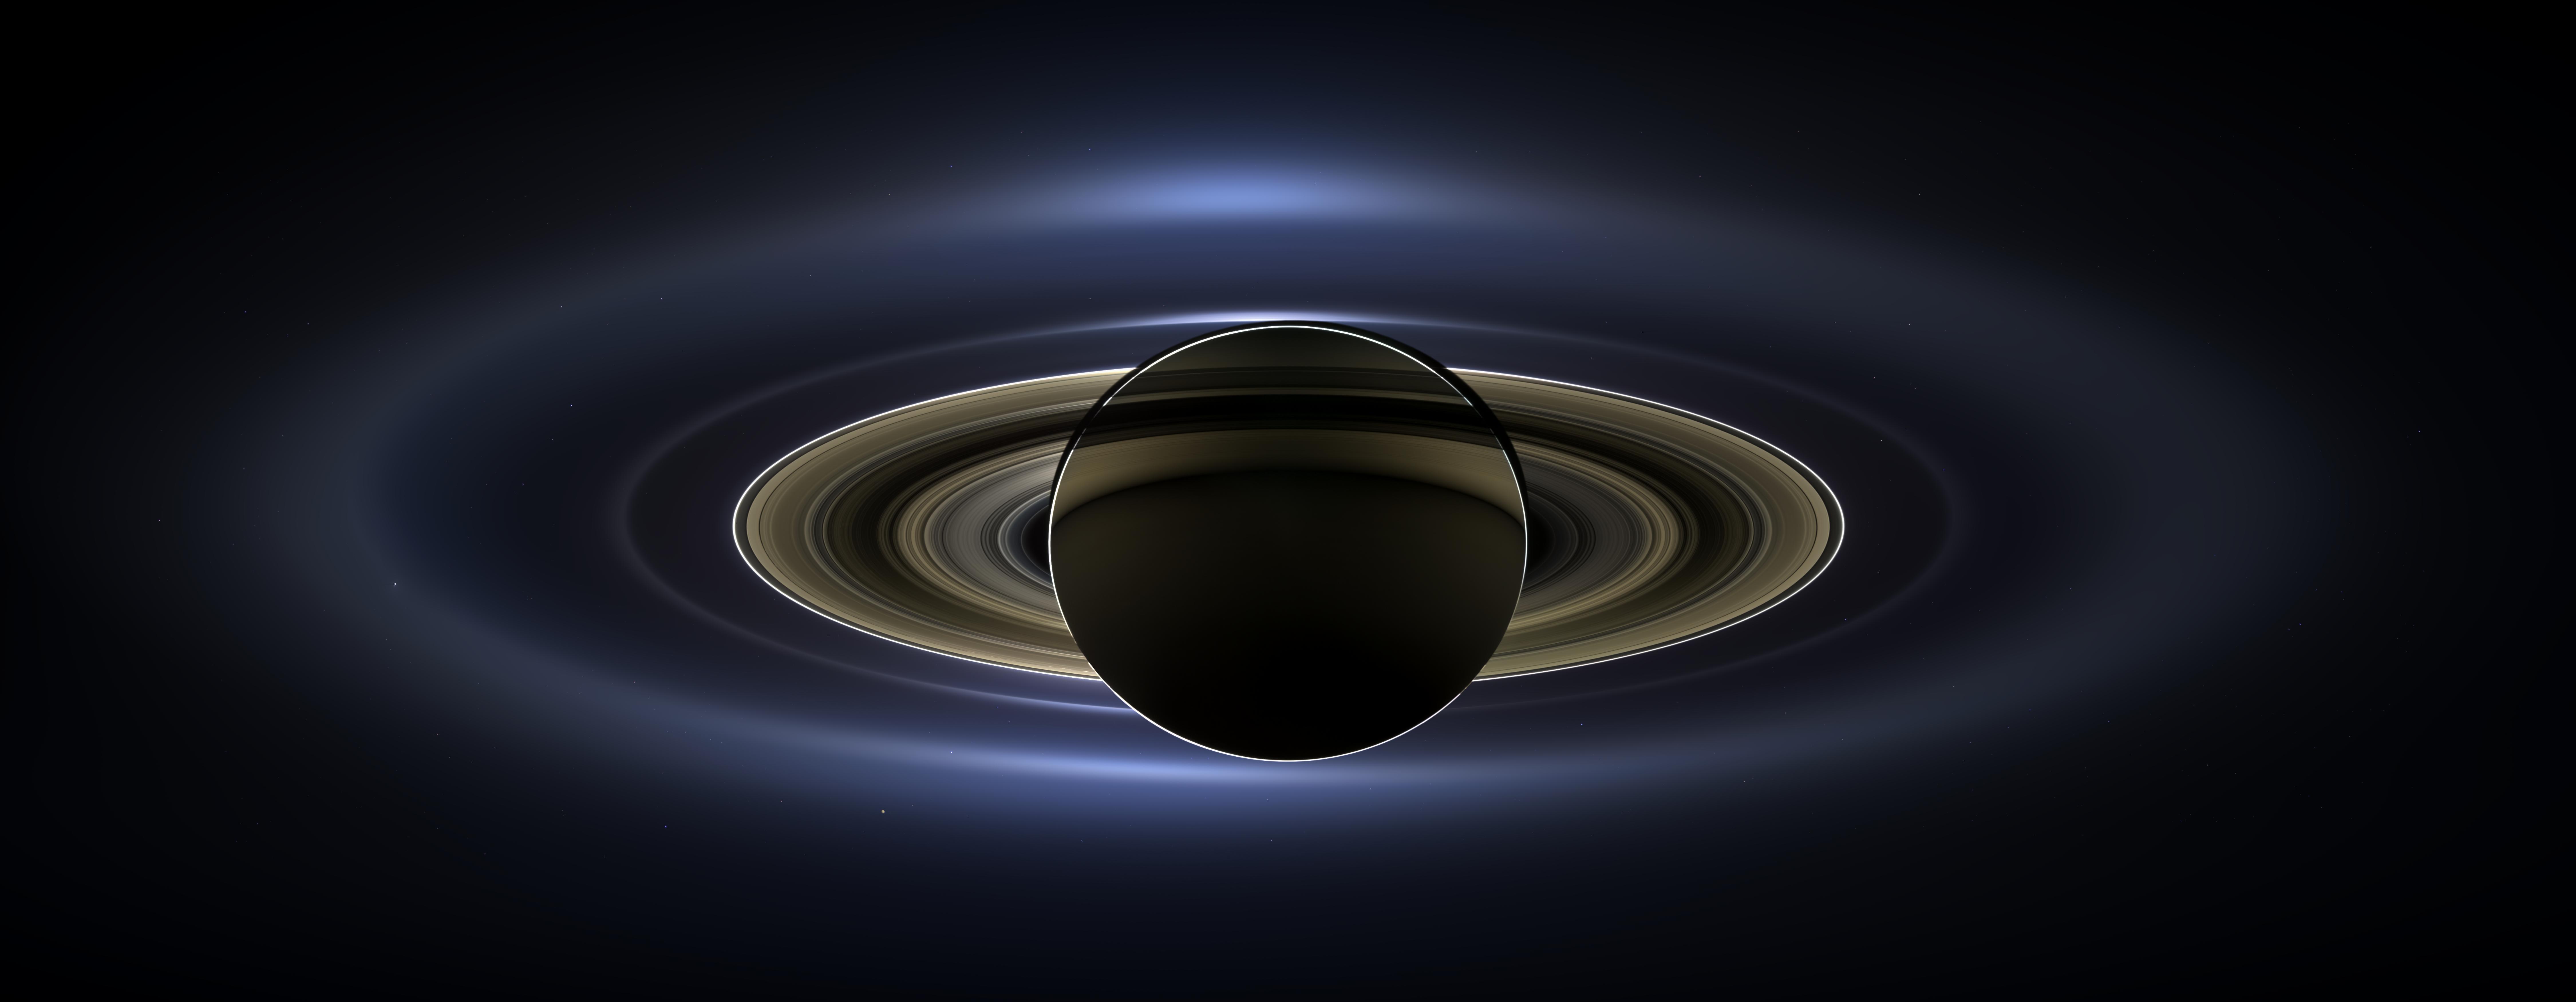 Saturn's majestic rings will vanish in 18 months • Earth.com